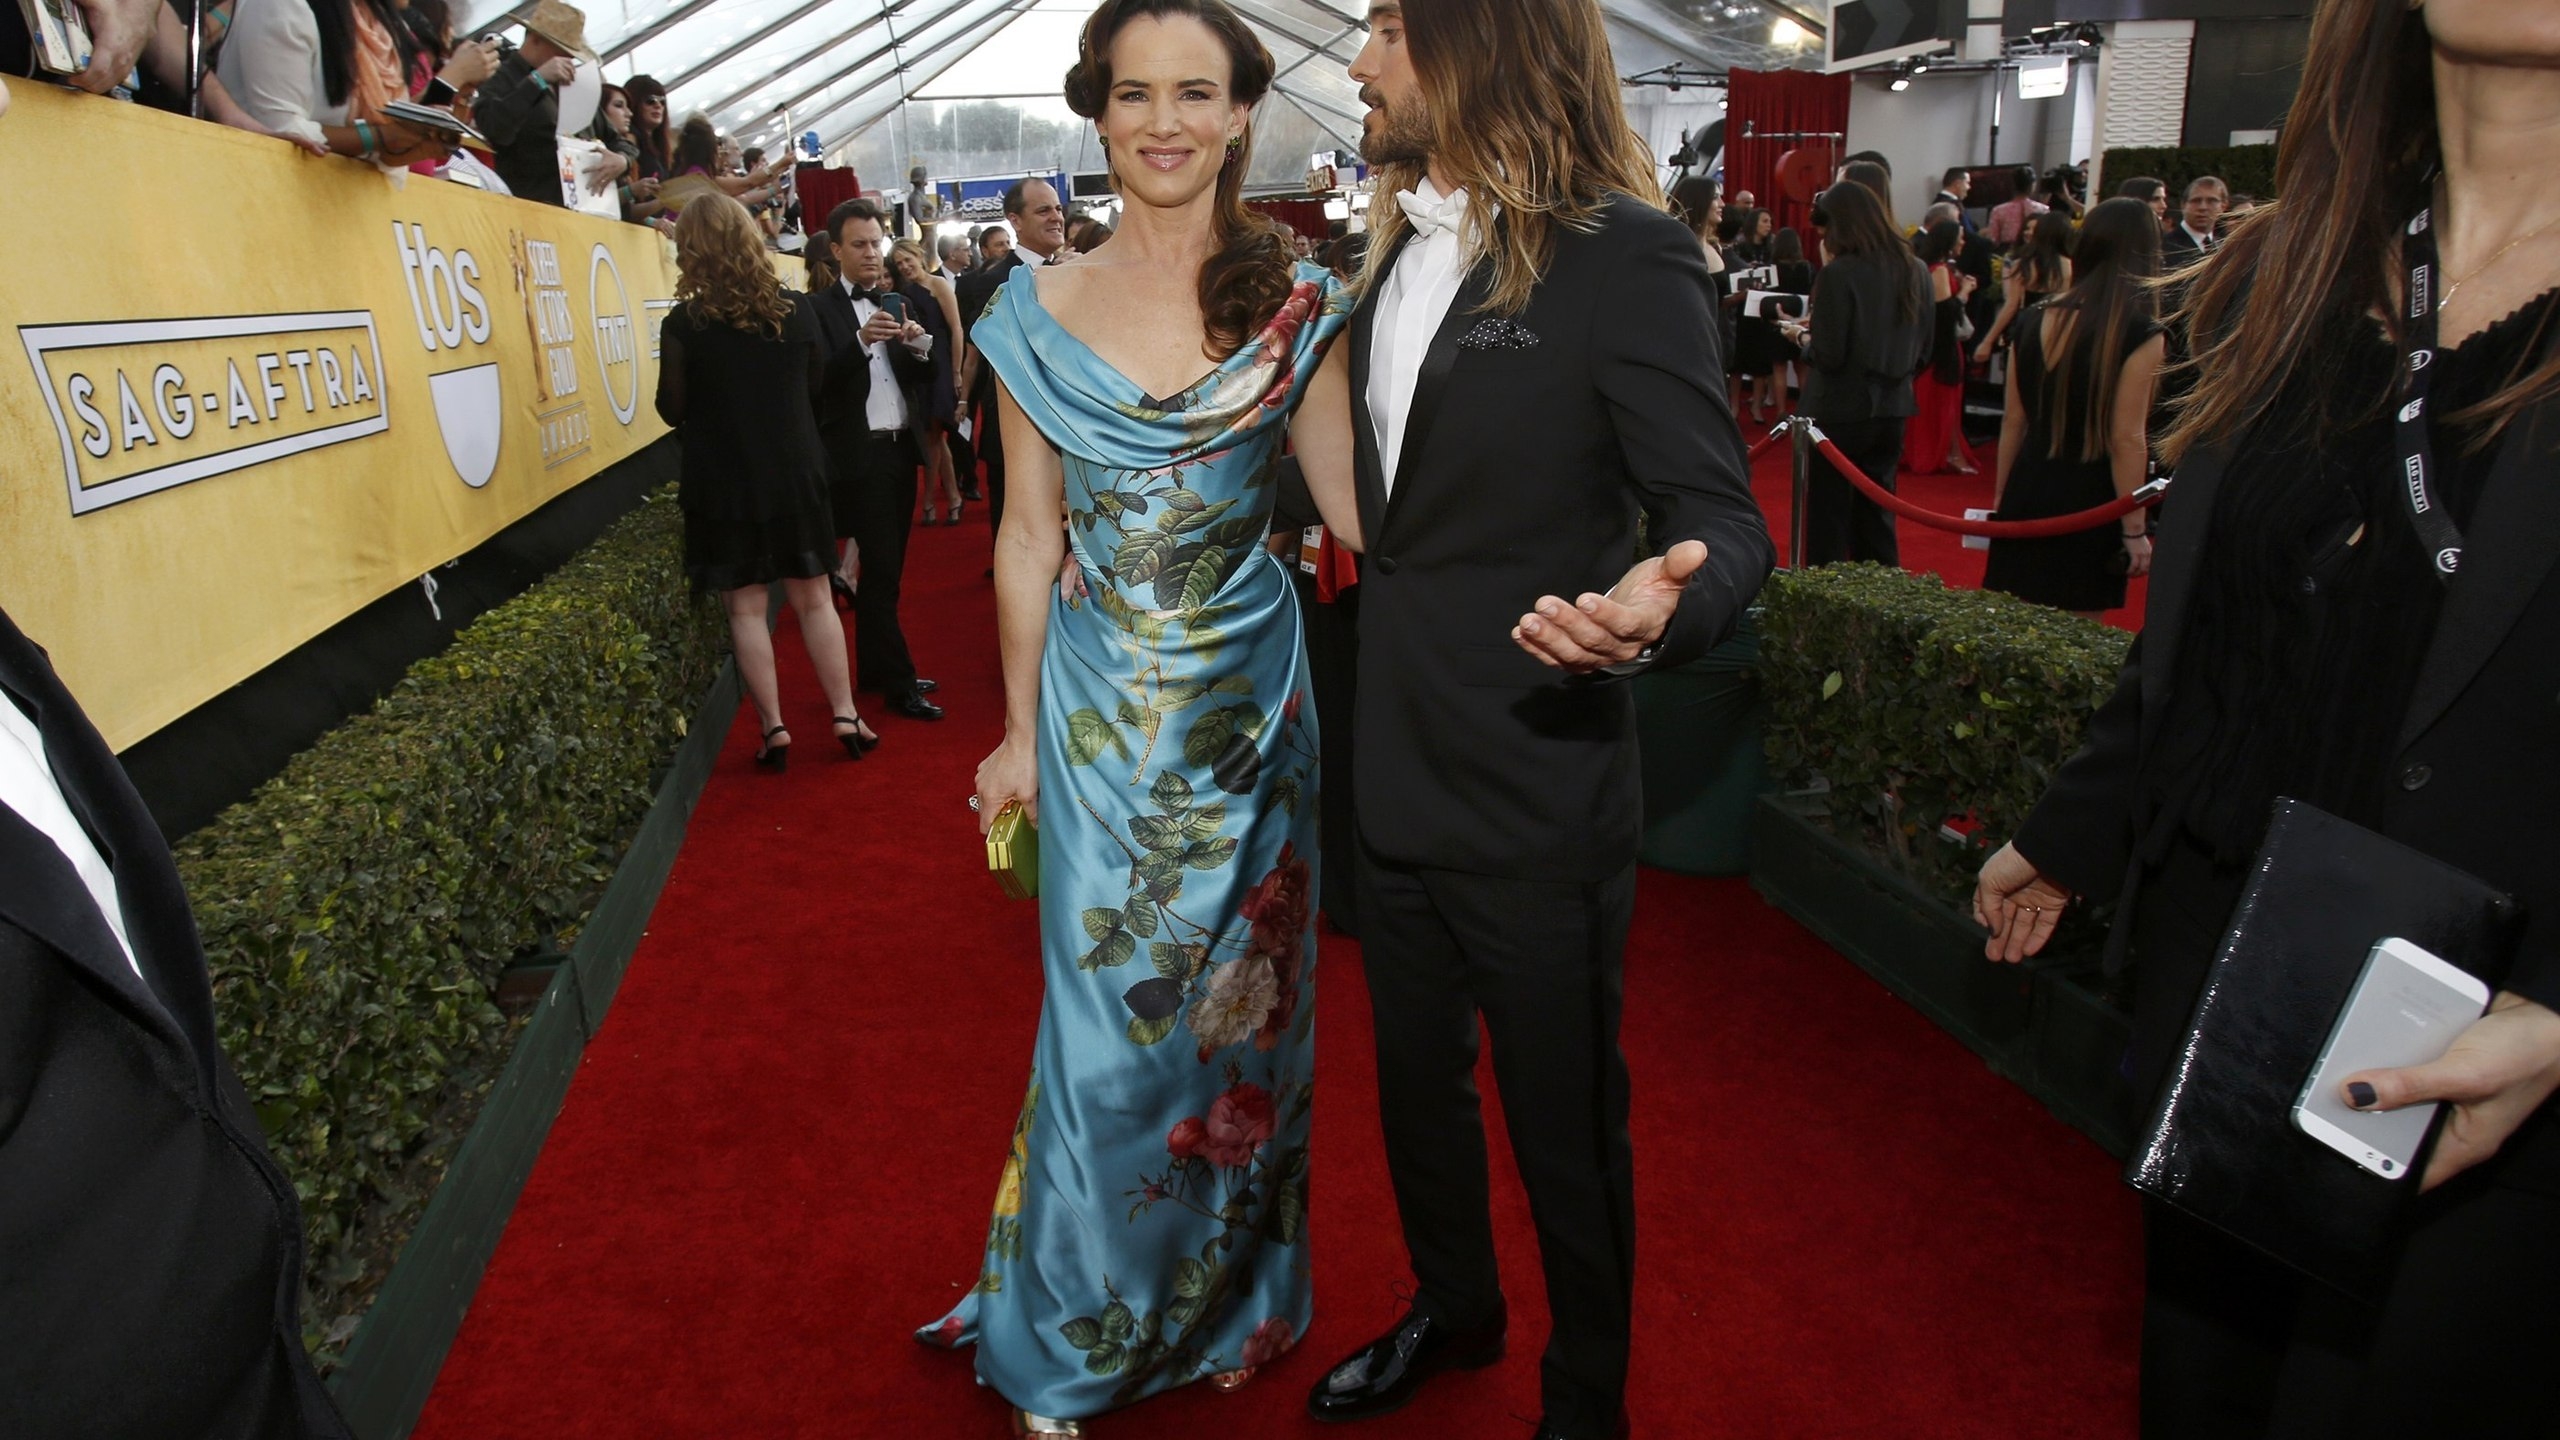 Juliette Lewis and Jared Leto for 2560x1440 HDTV resolution